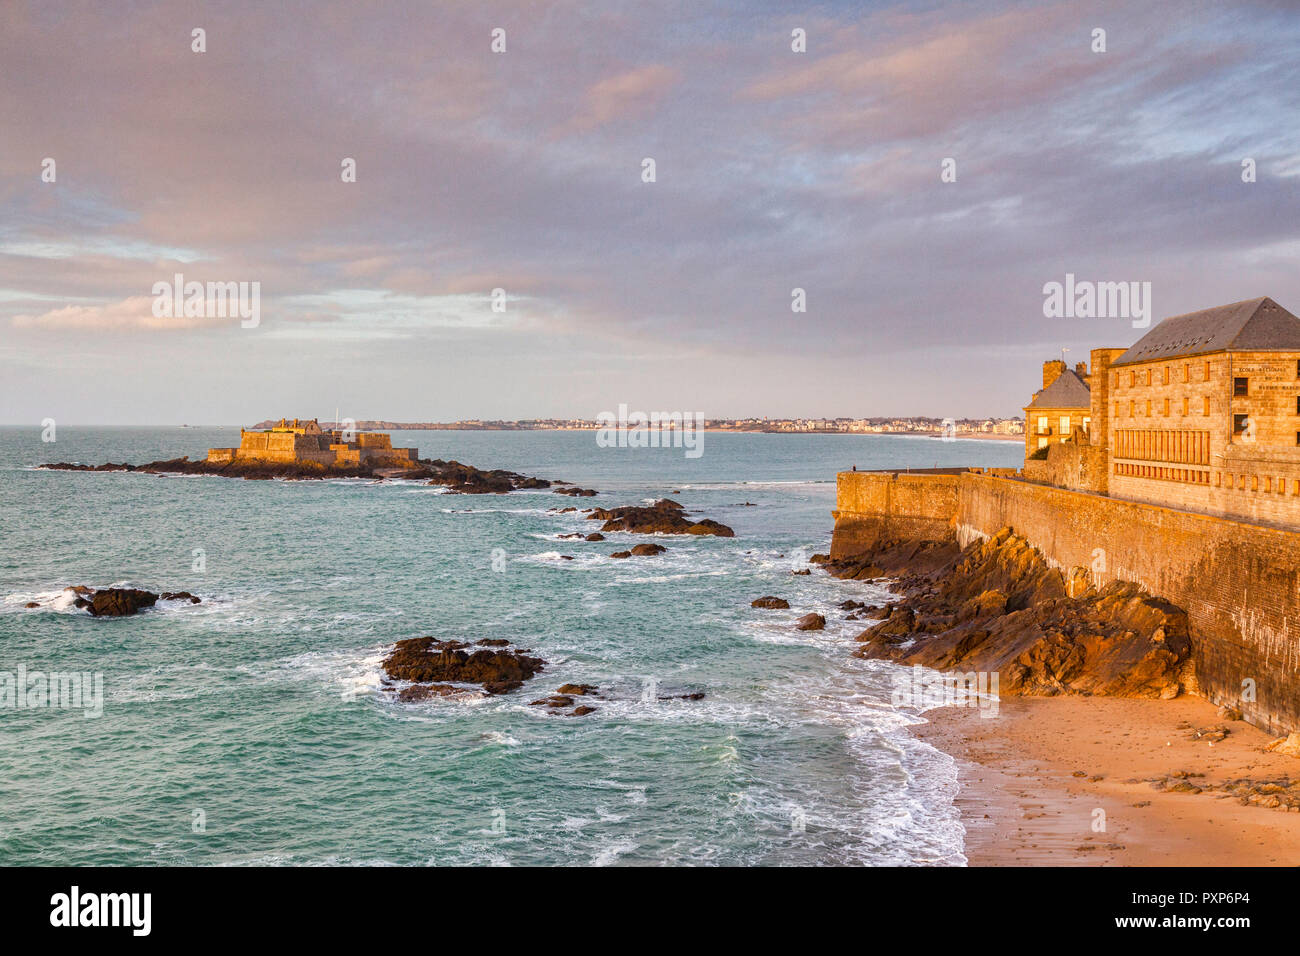 The old town and ramparts of Saint-Malo, Brittany, France, and Fort National. Stock Photo